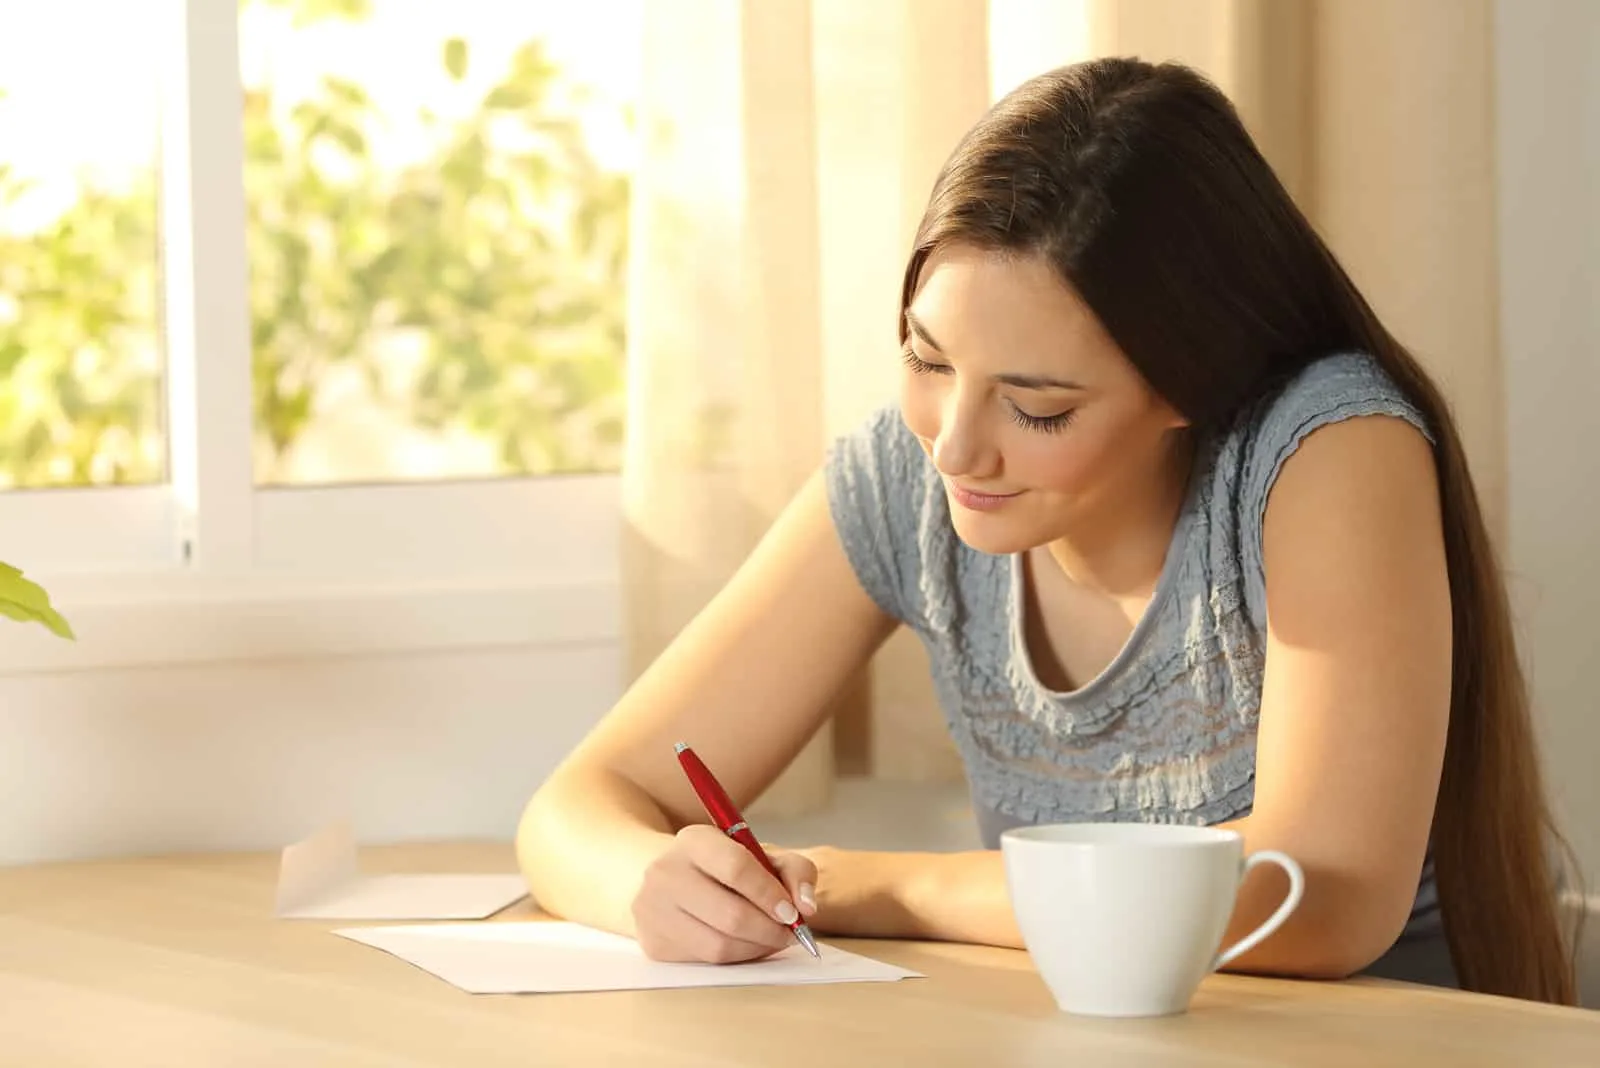 a woman with long brown hair sits writing a letter